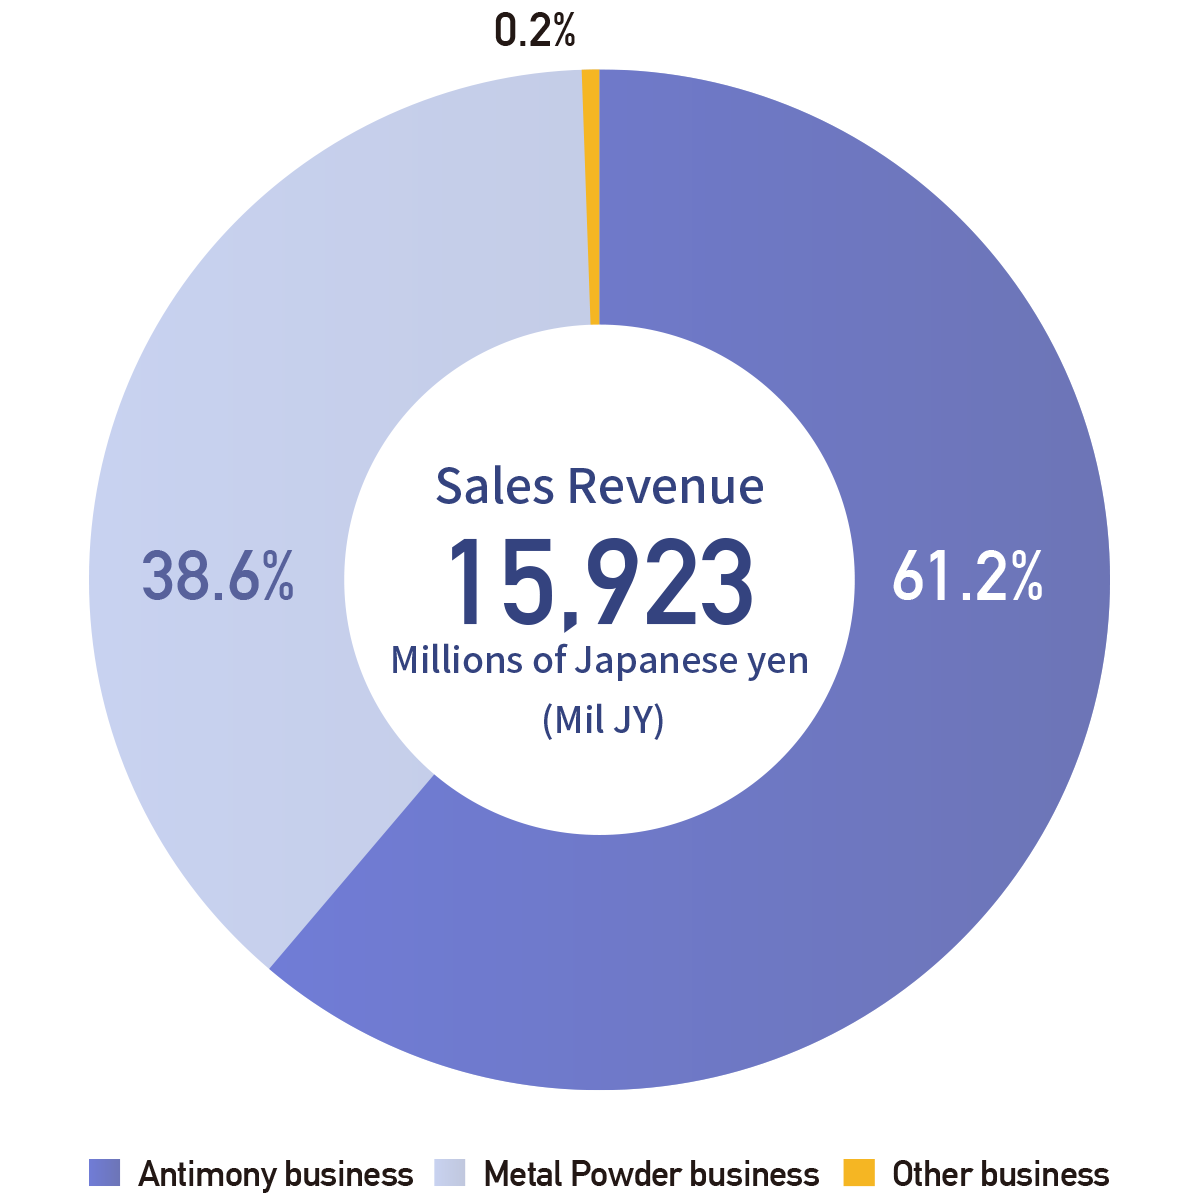 Sales Revenue by Business Segment (Full year)